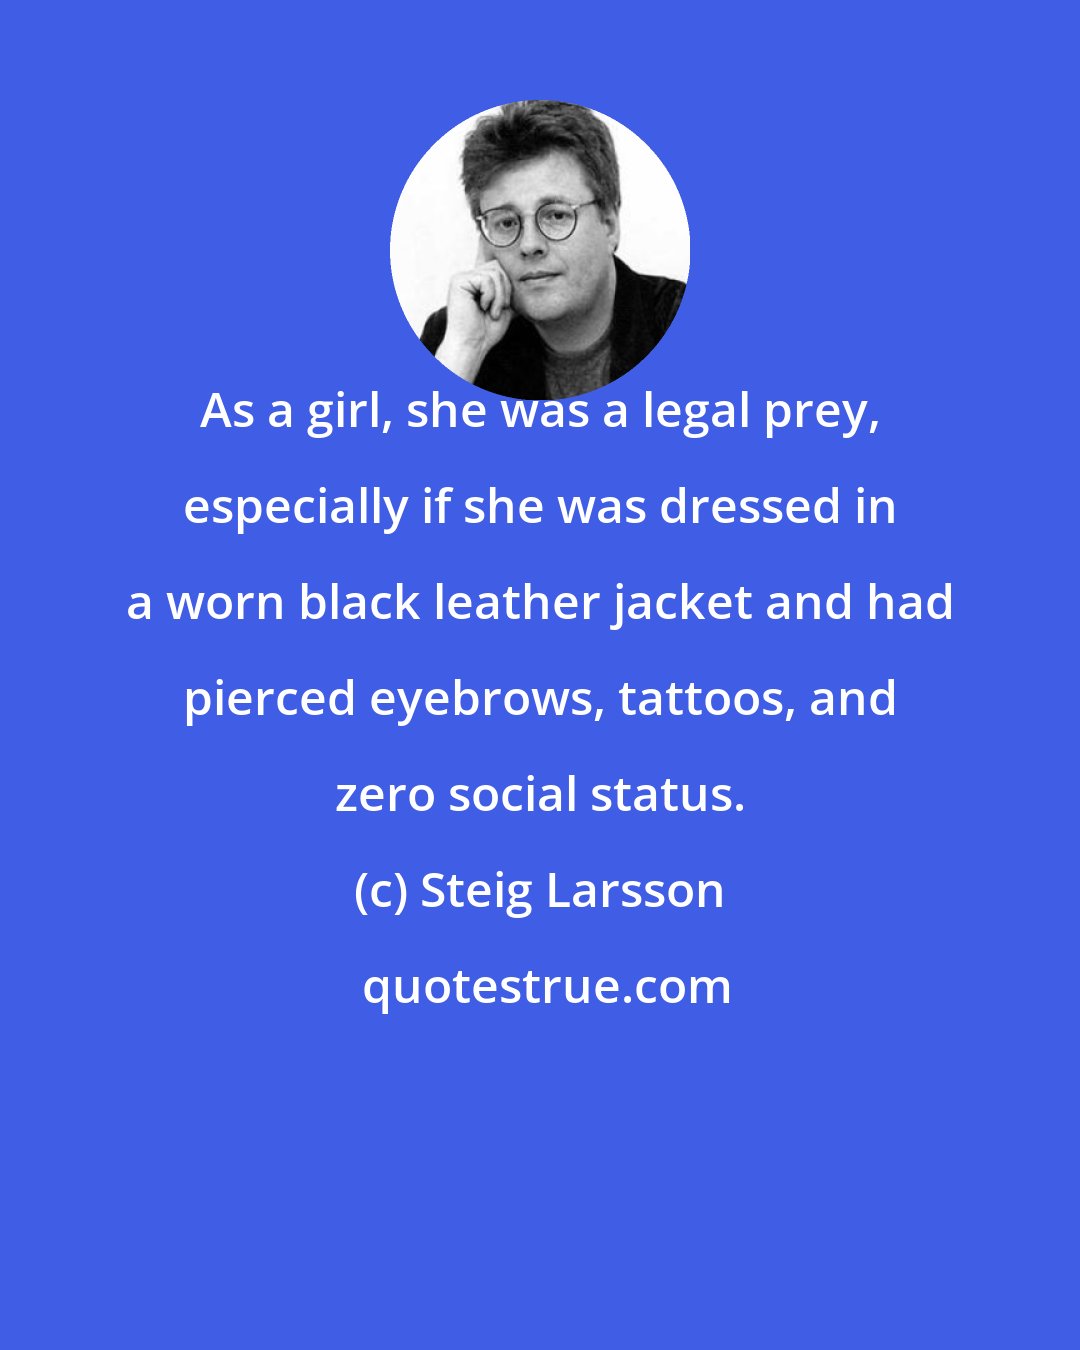 Steig Larsson: As a girl, she was a legal prey, especially if she was dressed in a worn black leather jacket and had pierced eyebrows, tattoos, and zero social status.